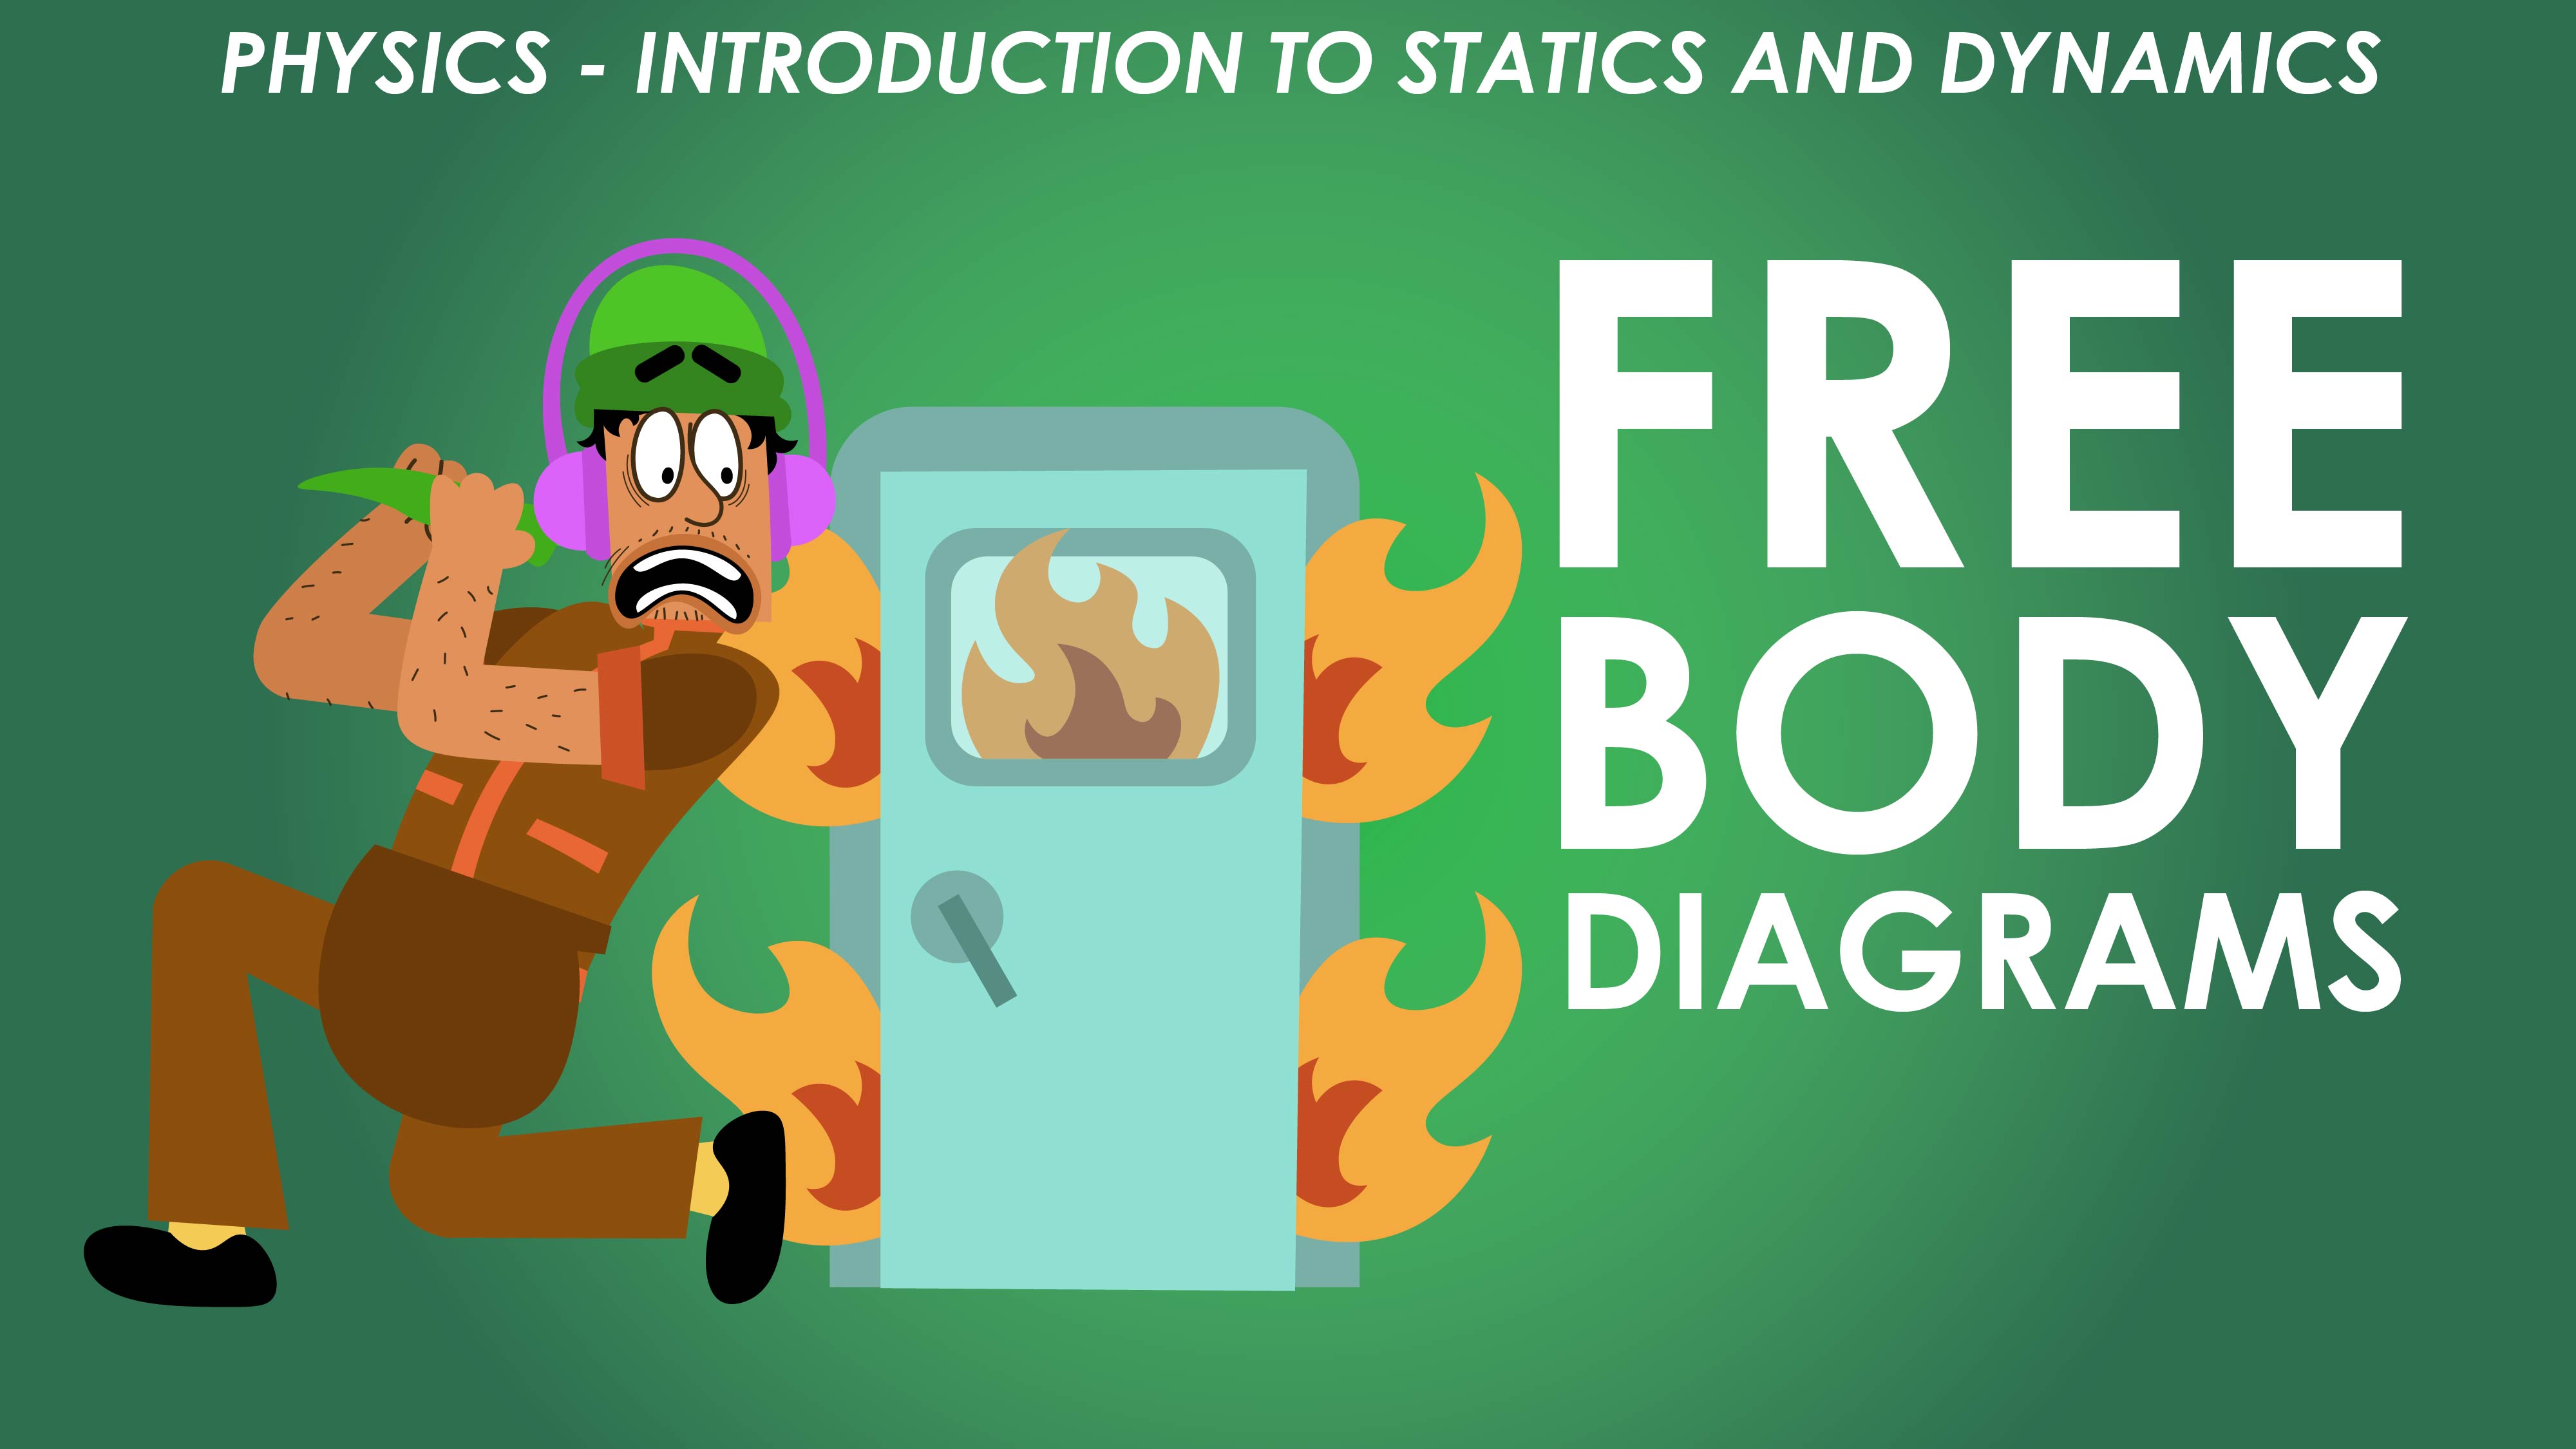 Free Body Diagrams - Forces and Newton’s Laws